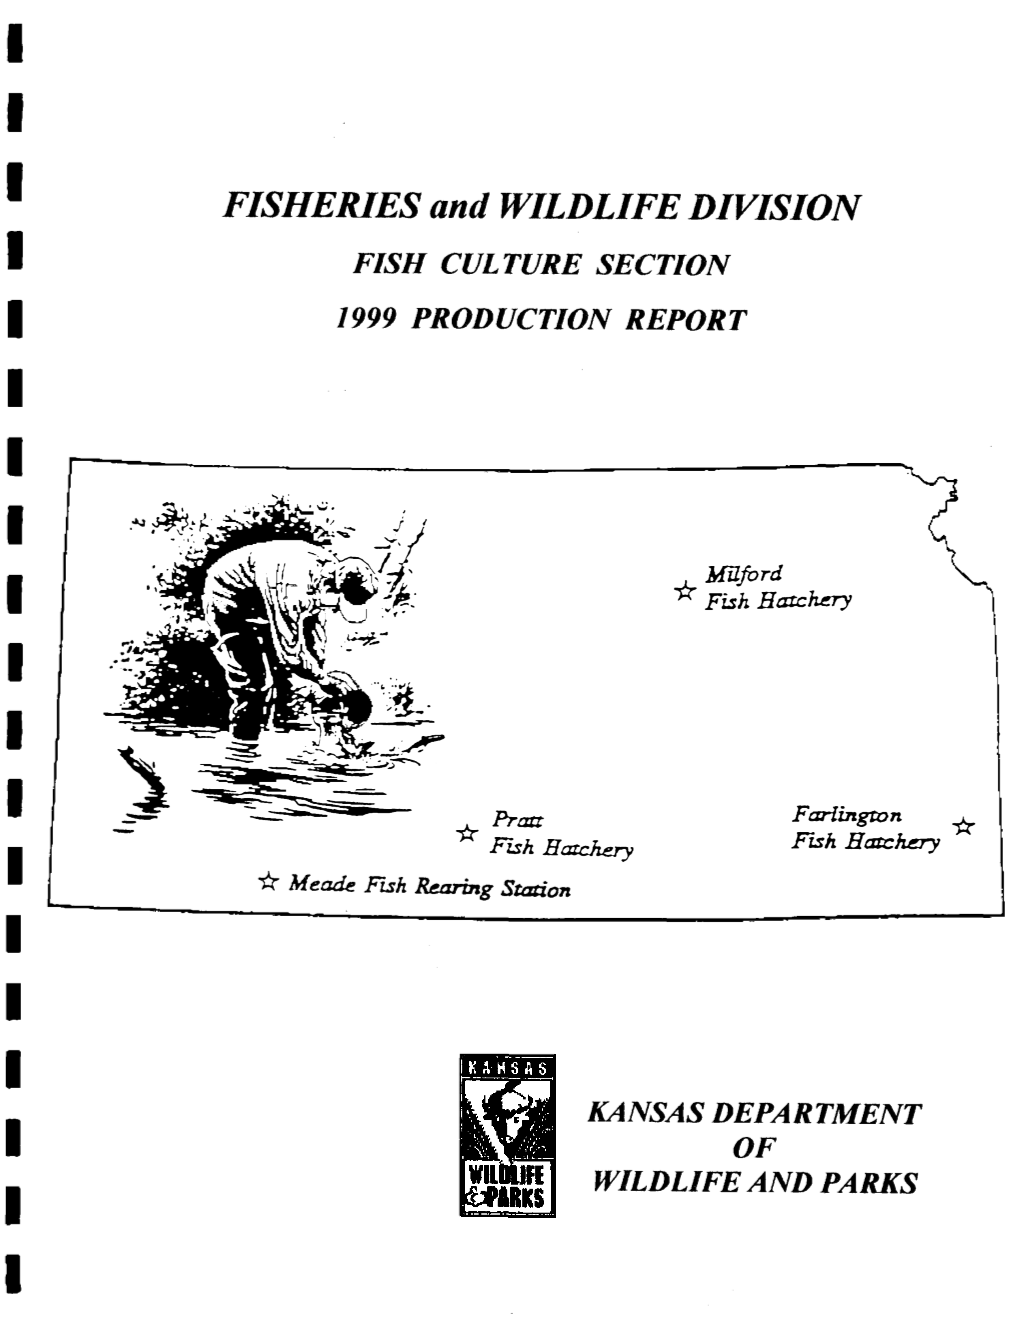 FISHERIES and WILDLIFE DIVISION FISH CULTURE SECTION 1999 PRODUCTION REPORT